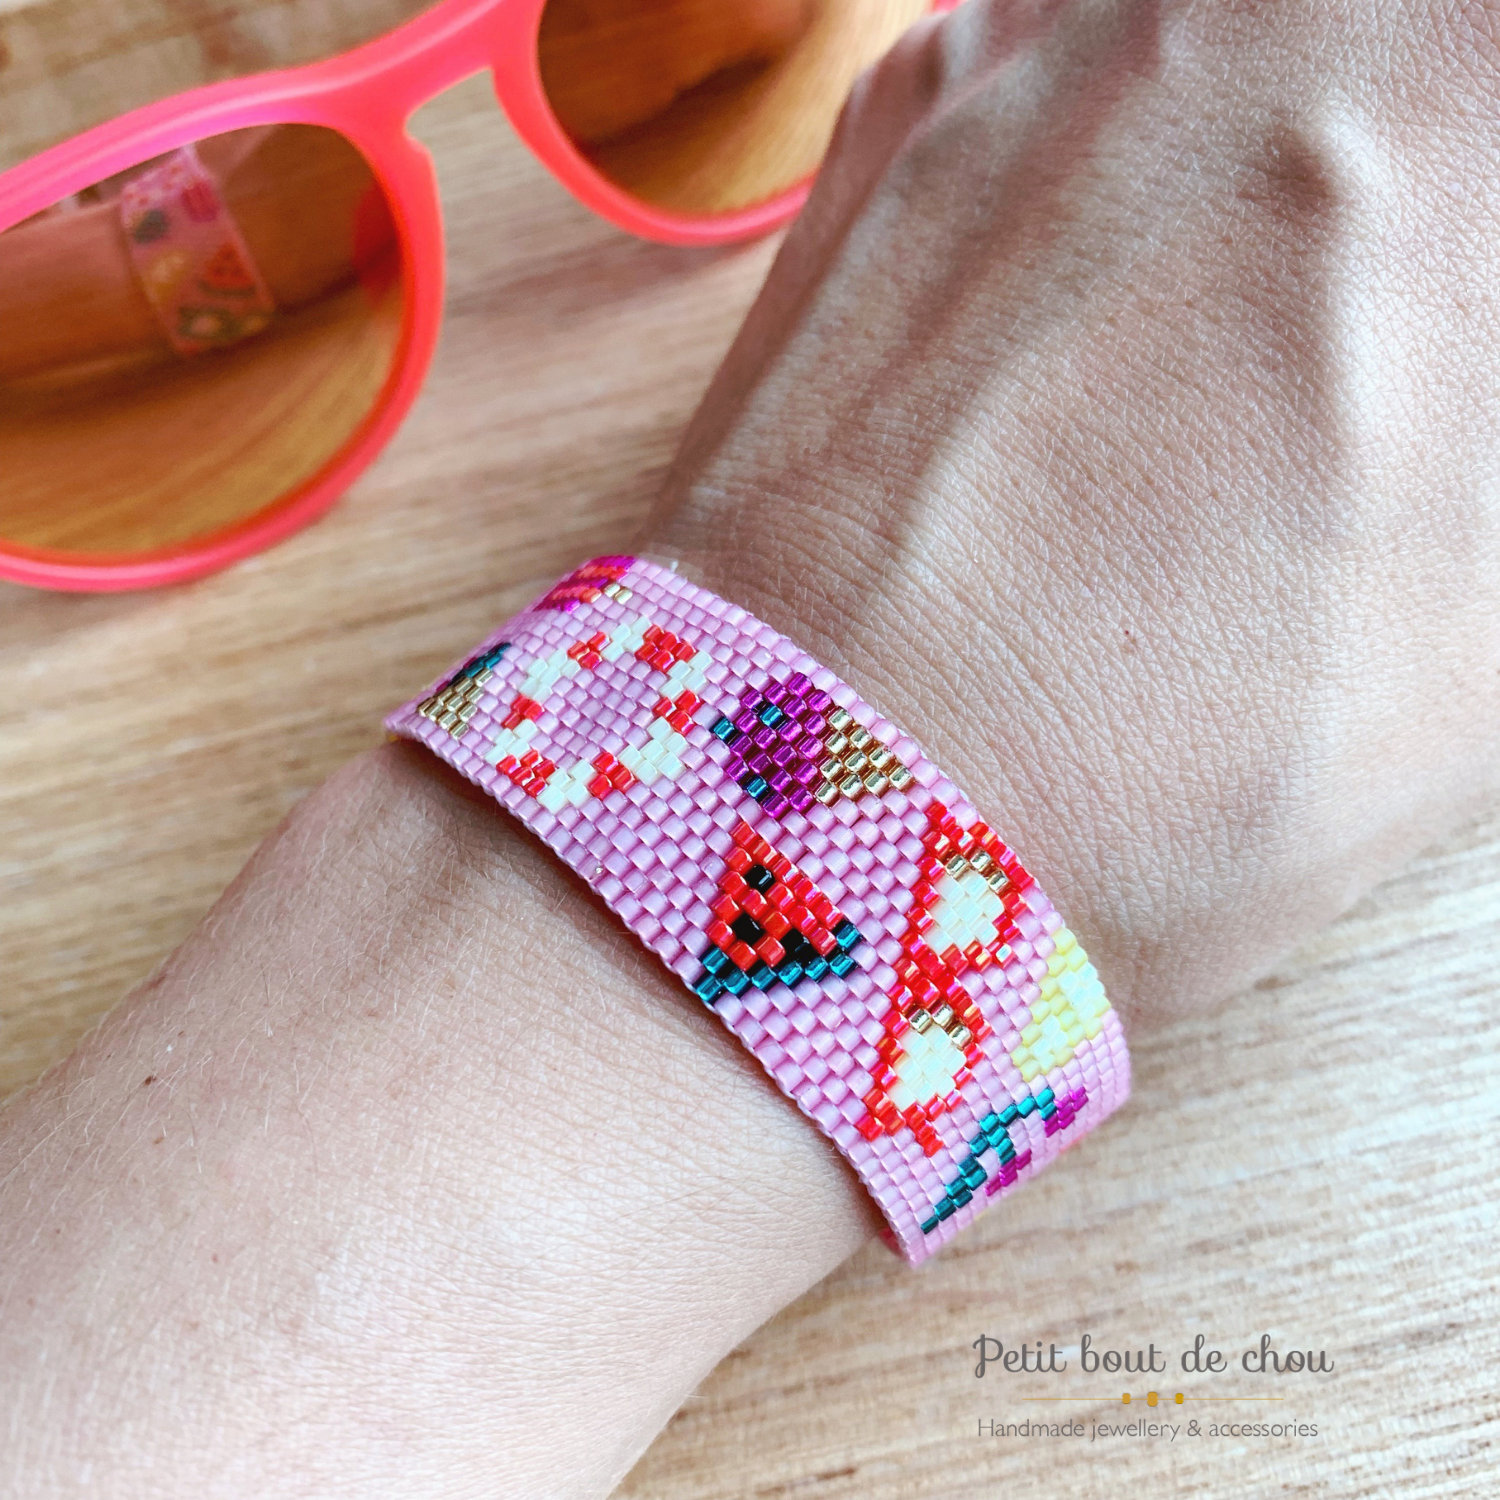 Hot Pink and Purple Peace Sign Bead Weaving Bracelet KIT - Peyote Stitch or  Bead Loom Bracelet Pattern and Delica Beads Included. P7